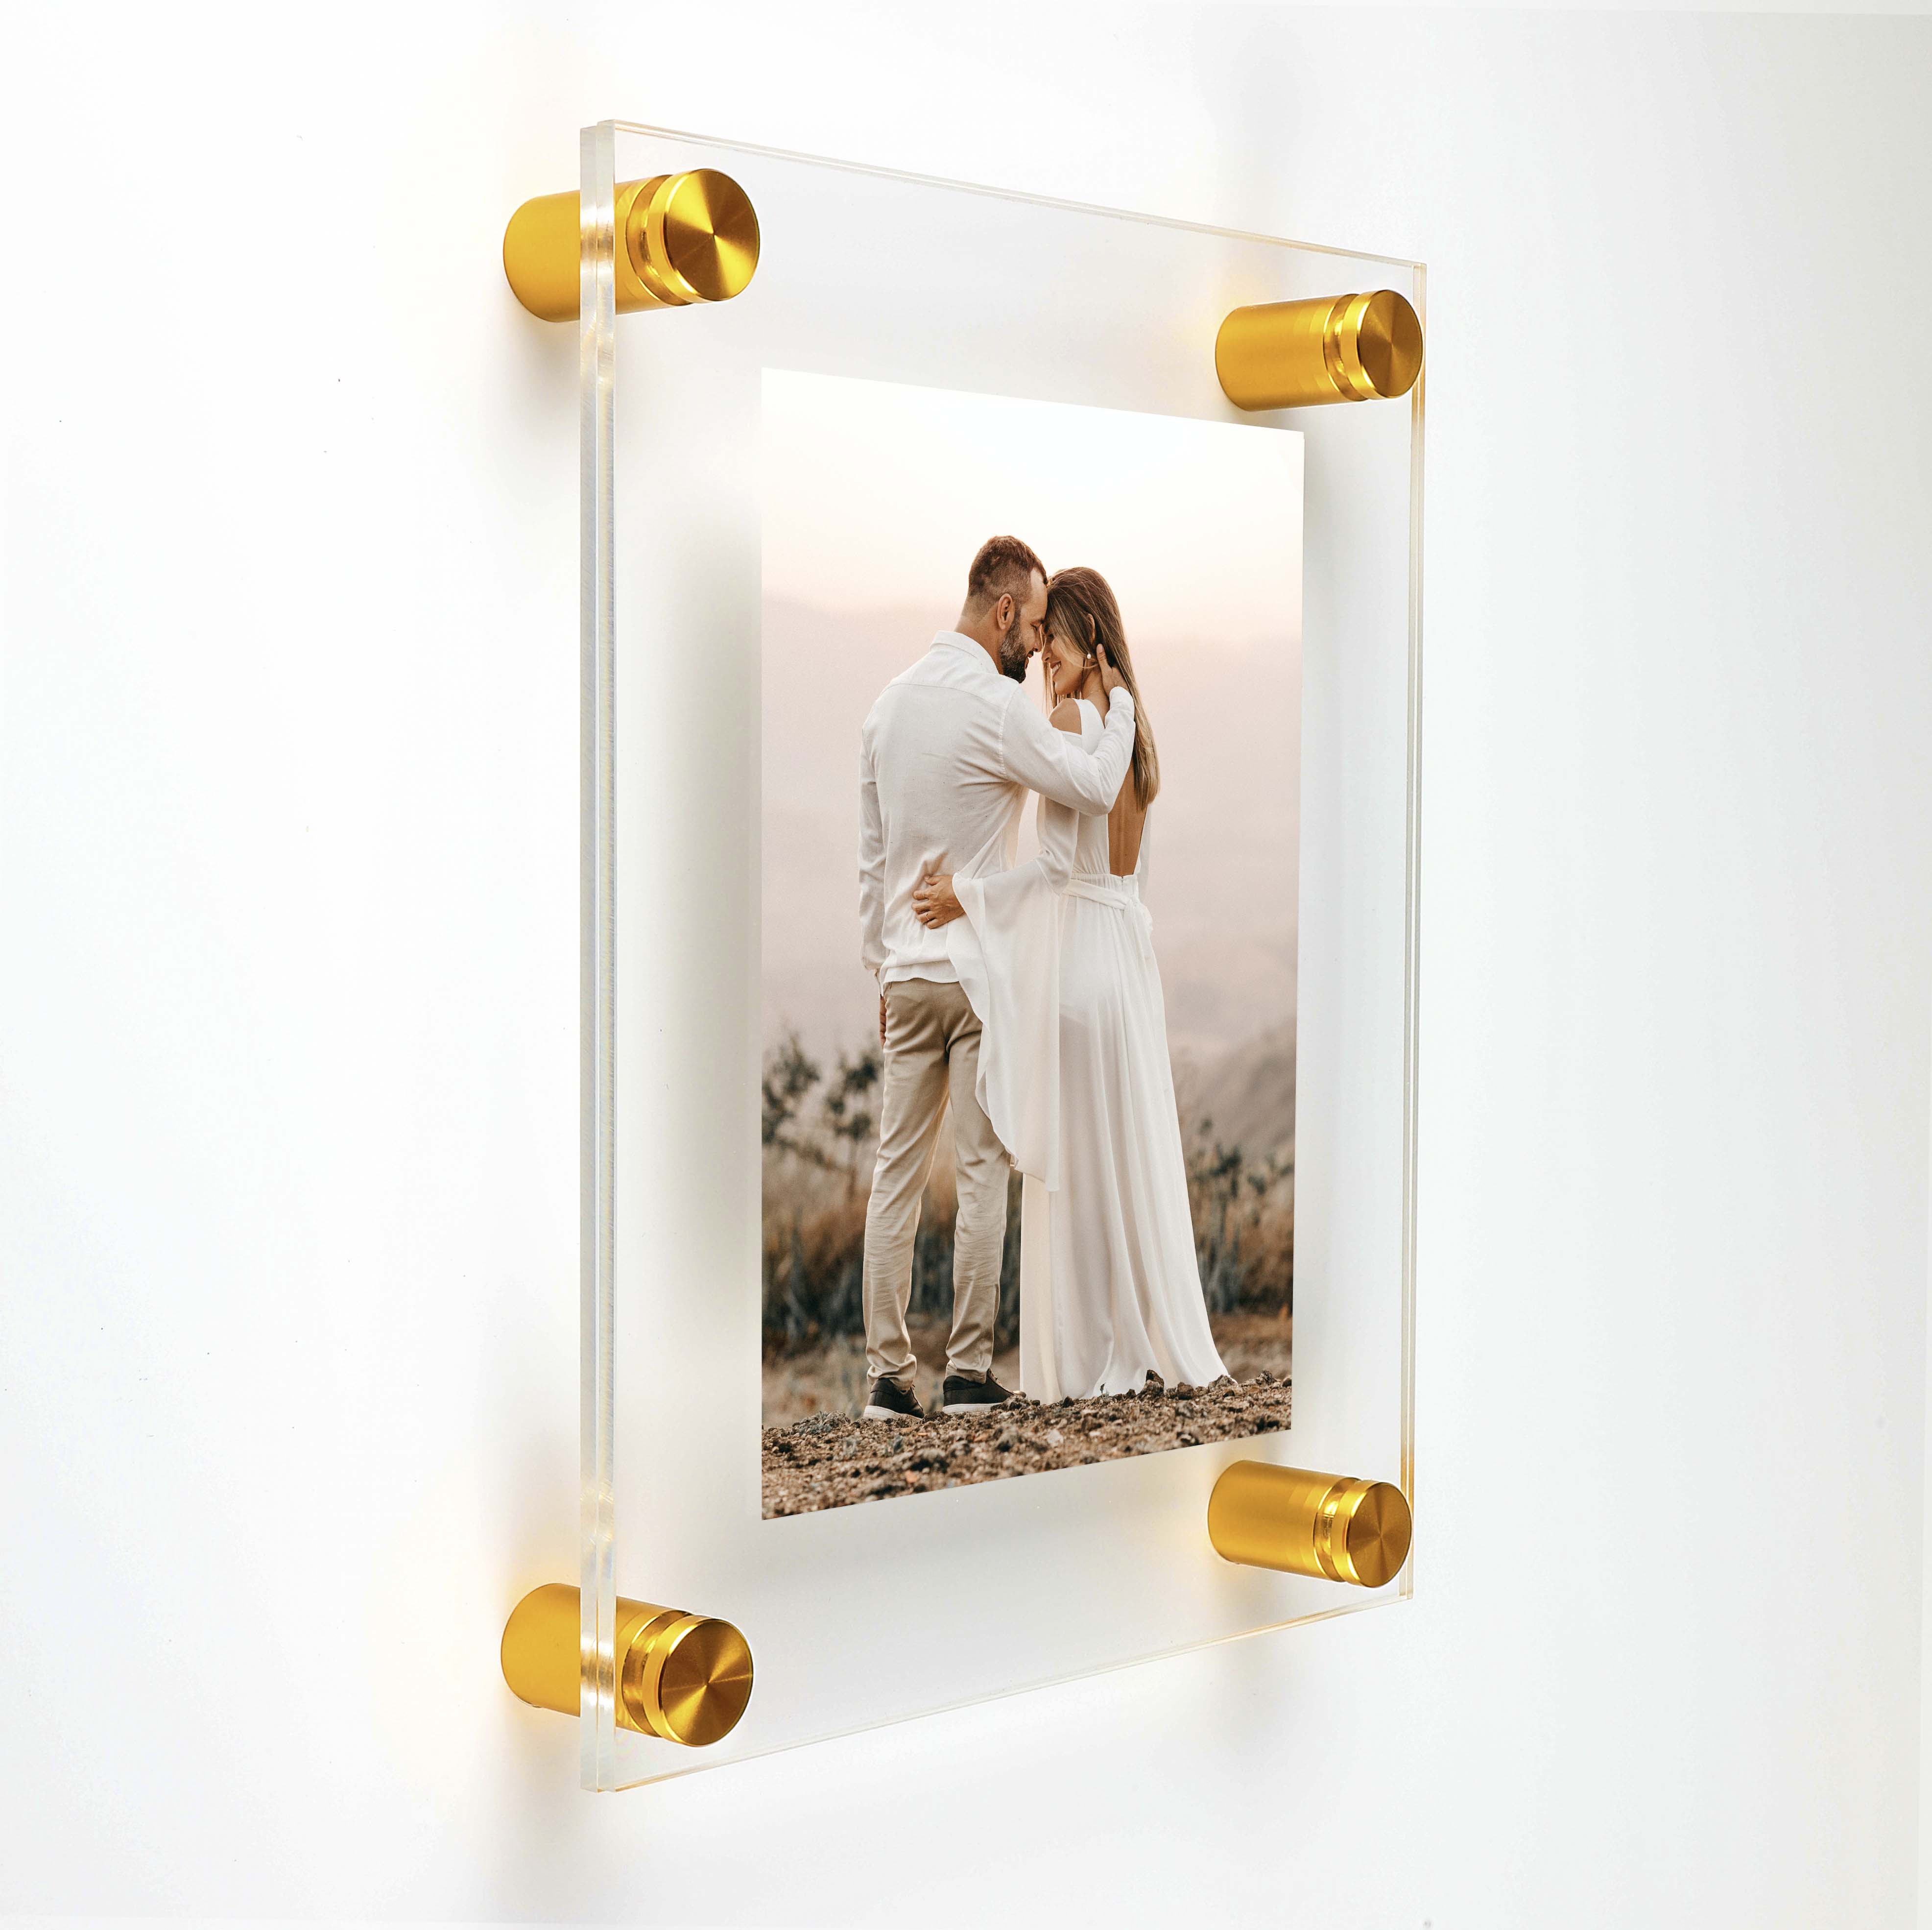 (2) 11'' x 13-1/2'' Clear Acrylics , Pre-Drilled With Polished Edges (Thick 1/8'' each), Wall Frame with (4) 5/8'' x 3/4'' Gold Anodized Aluminum Standoffs includes Screws and Anchors